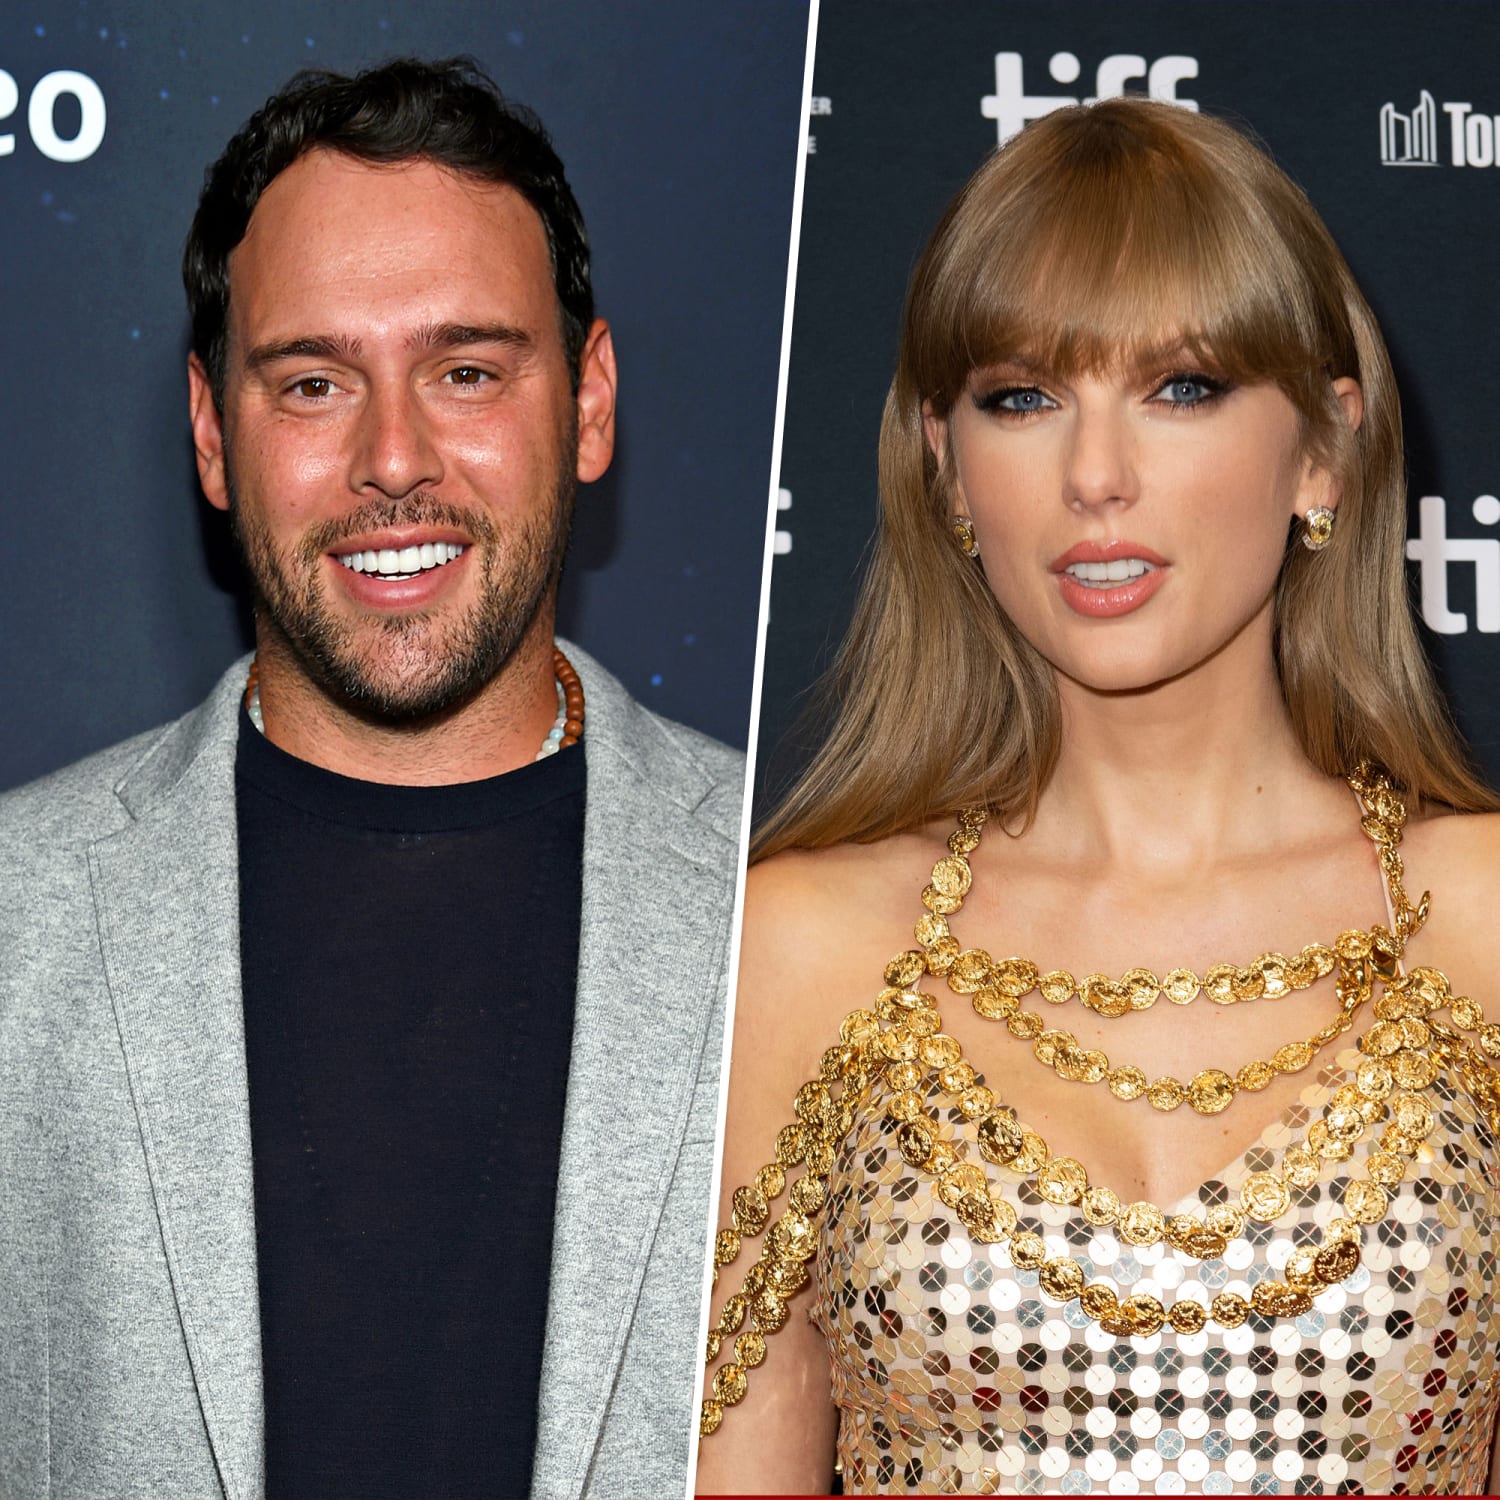 Scooter Braun says he 'learned an important lesson' after Taylor